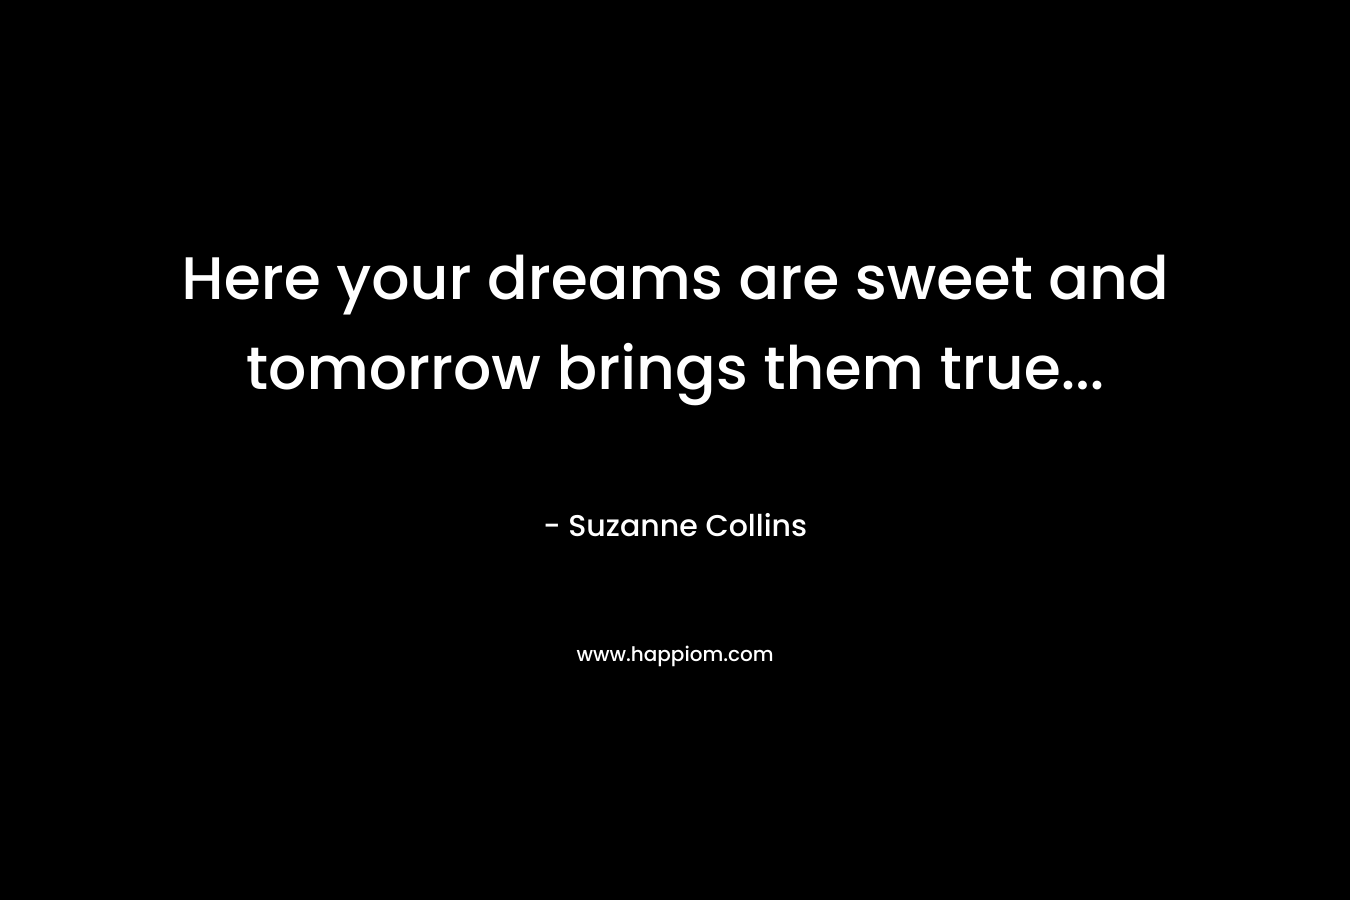 Here your dreams are sweet and tomorrow brings them true...